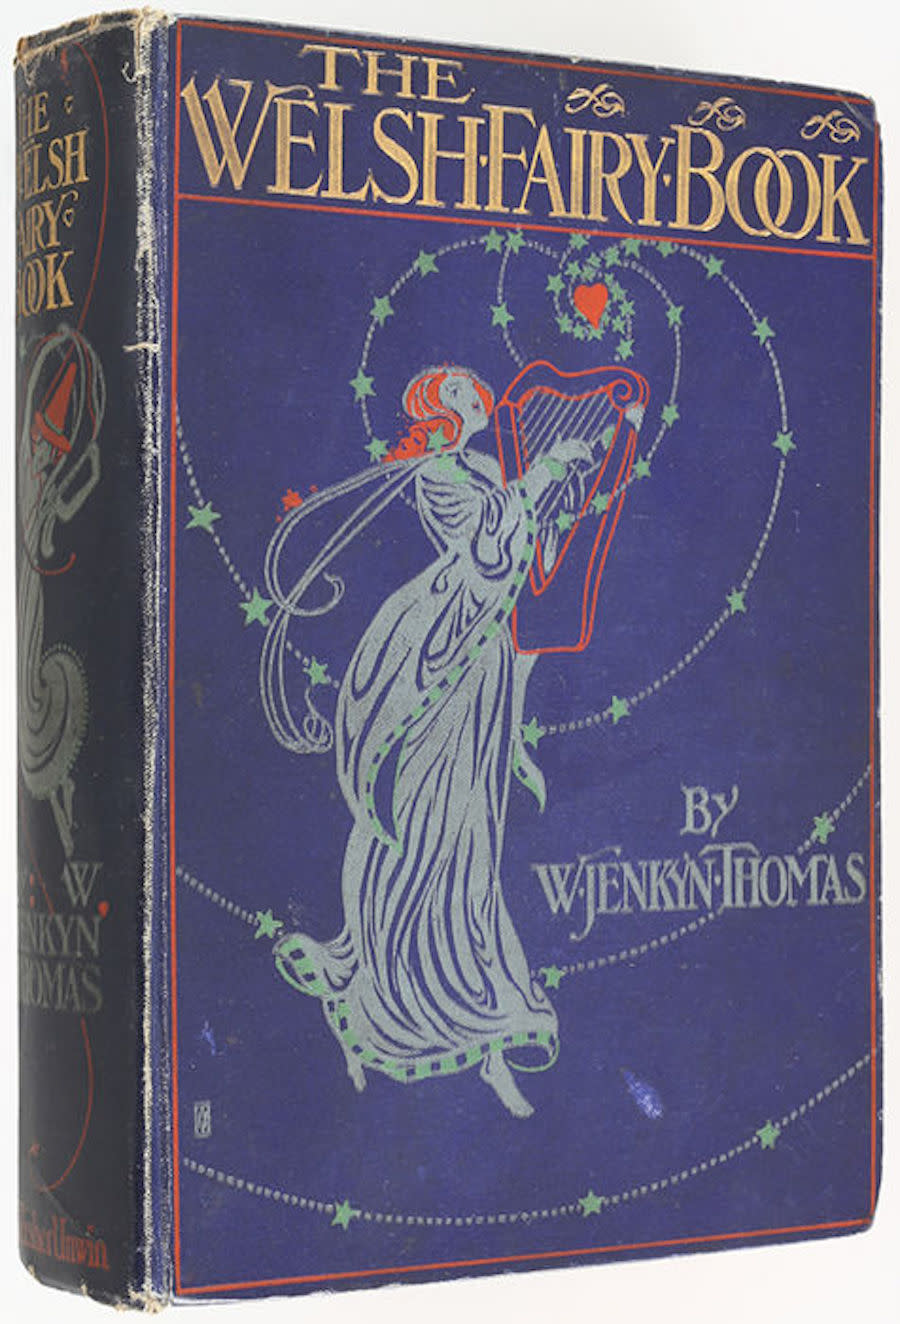 The first edition cover of The Welsh Fairy Book by W. Jenkyn Thomas